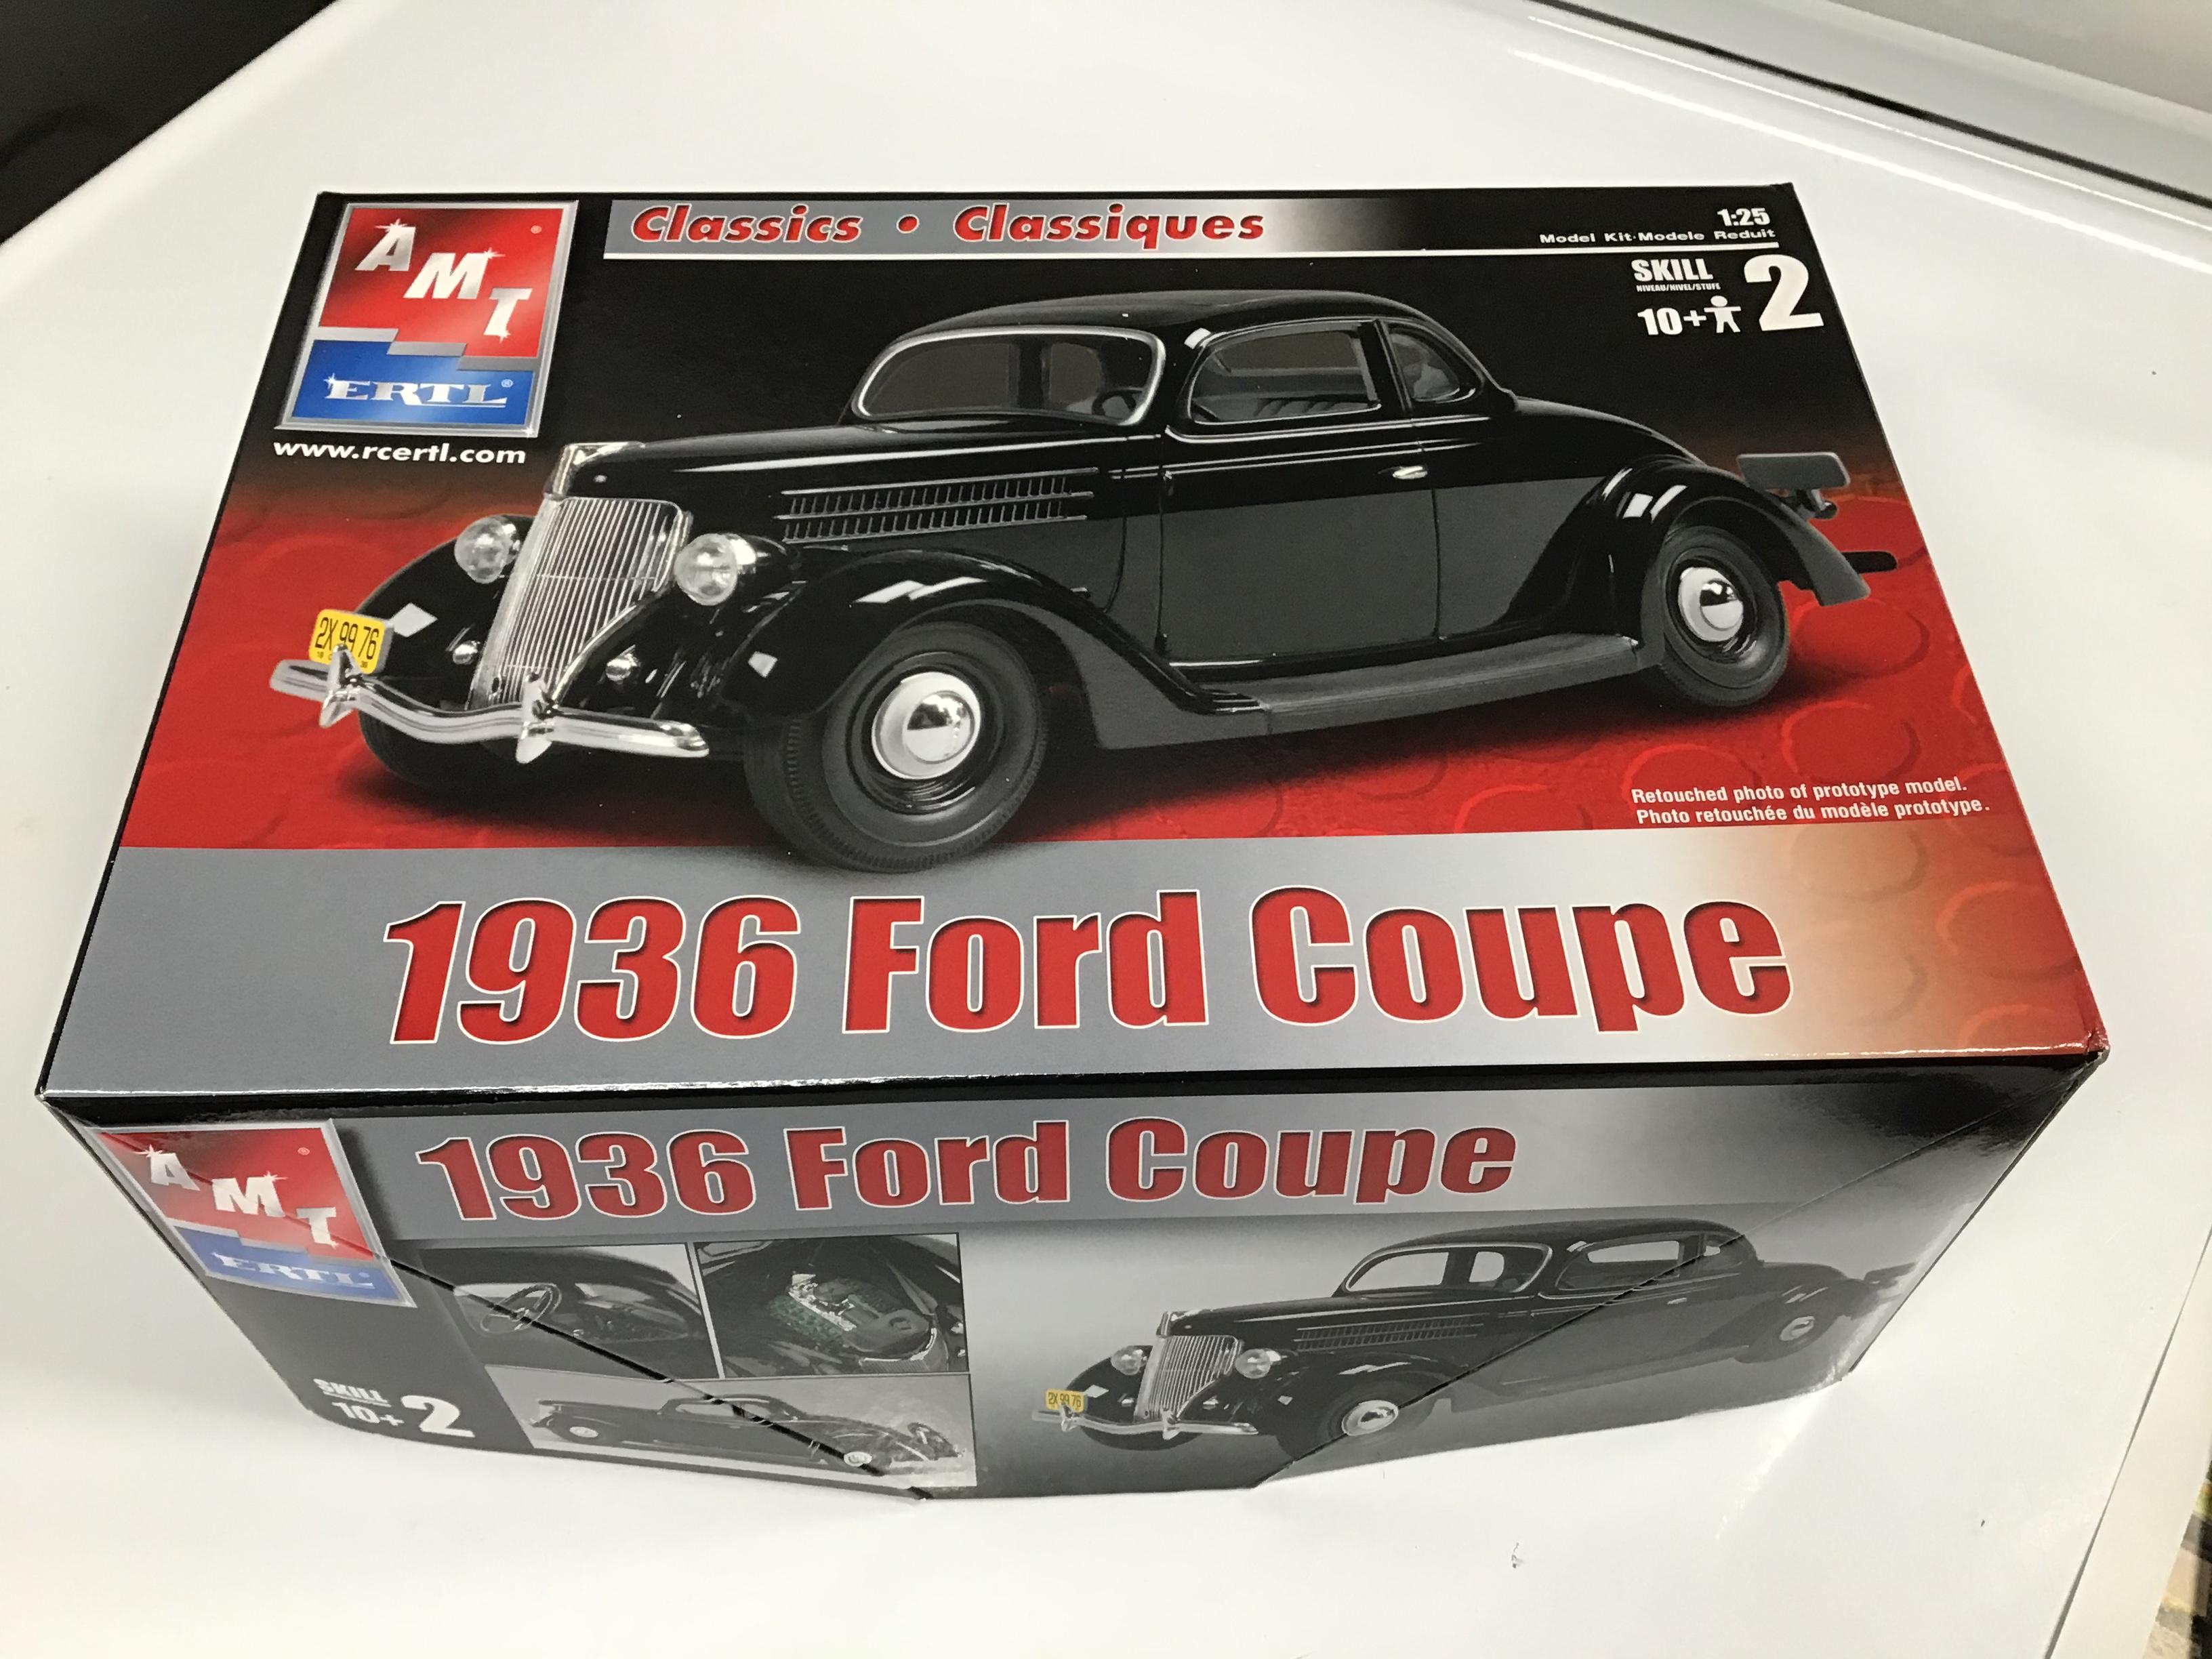 AMT '36 Ford Coupe - WIP: Model Cars - Model Cars Magazine Forum